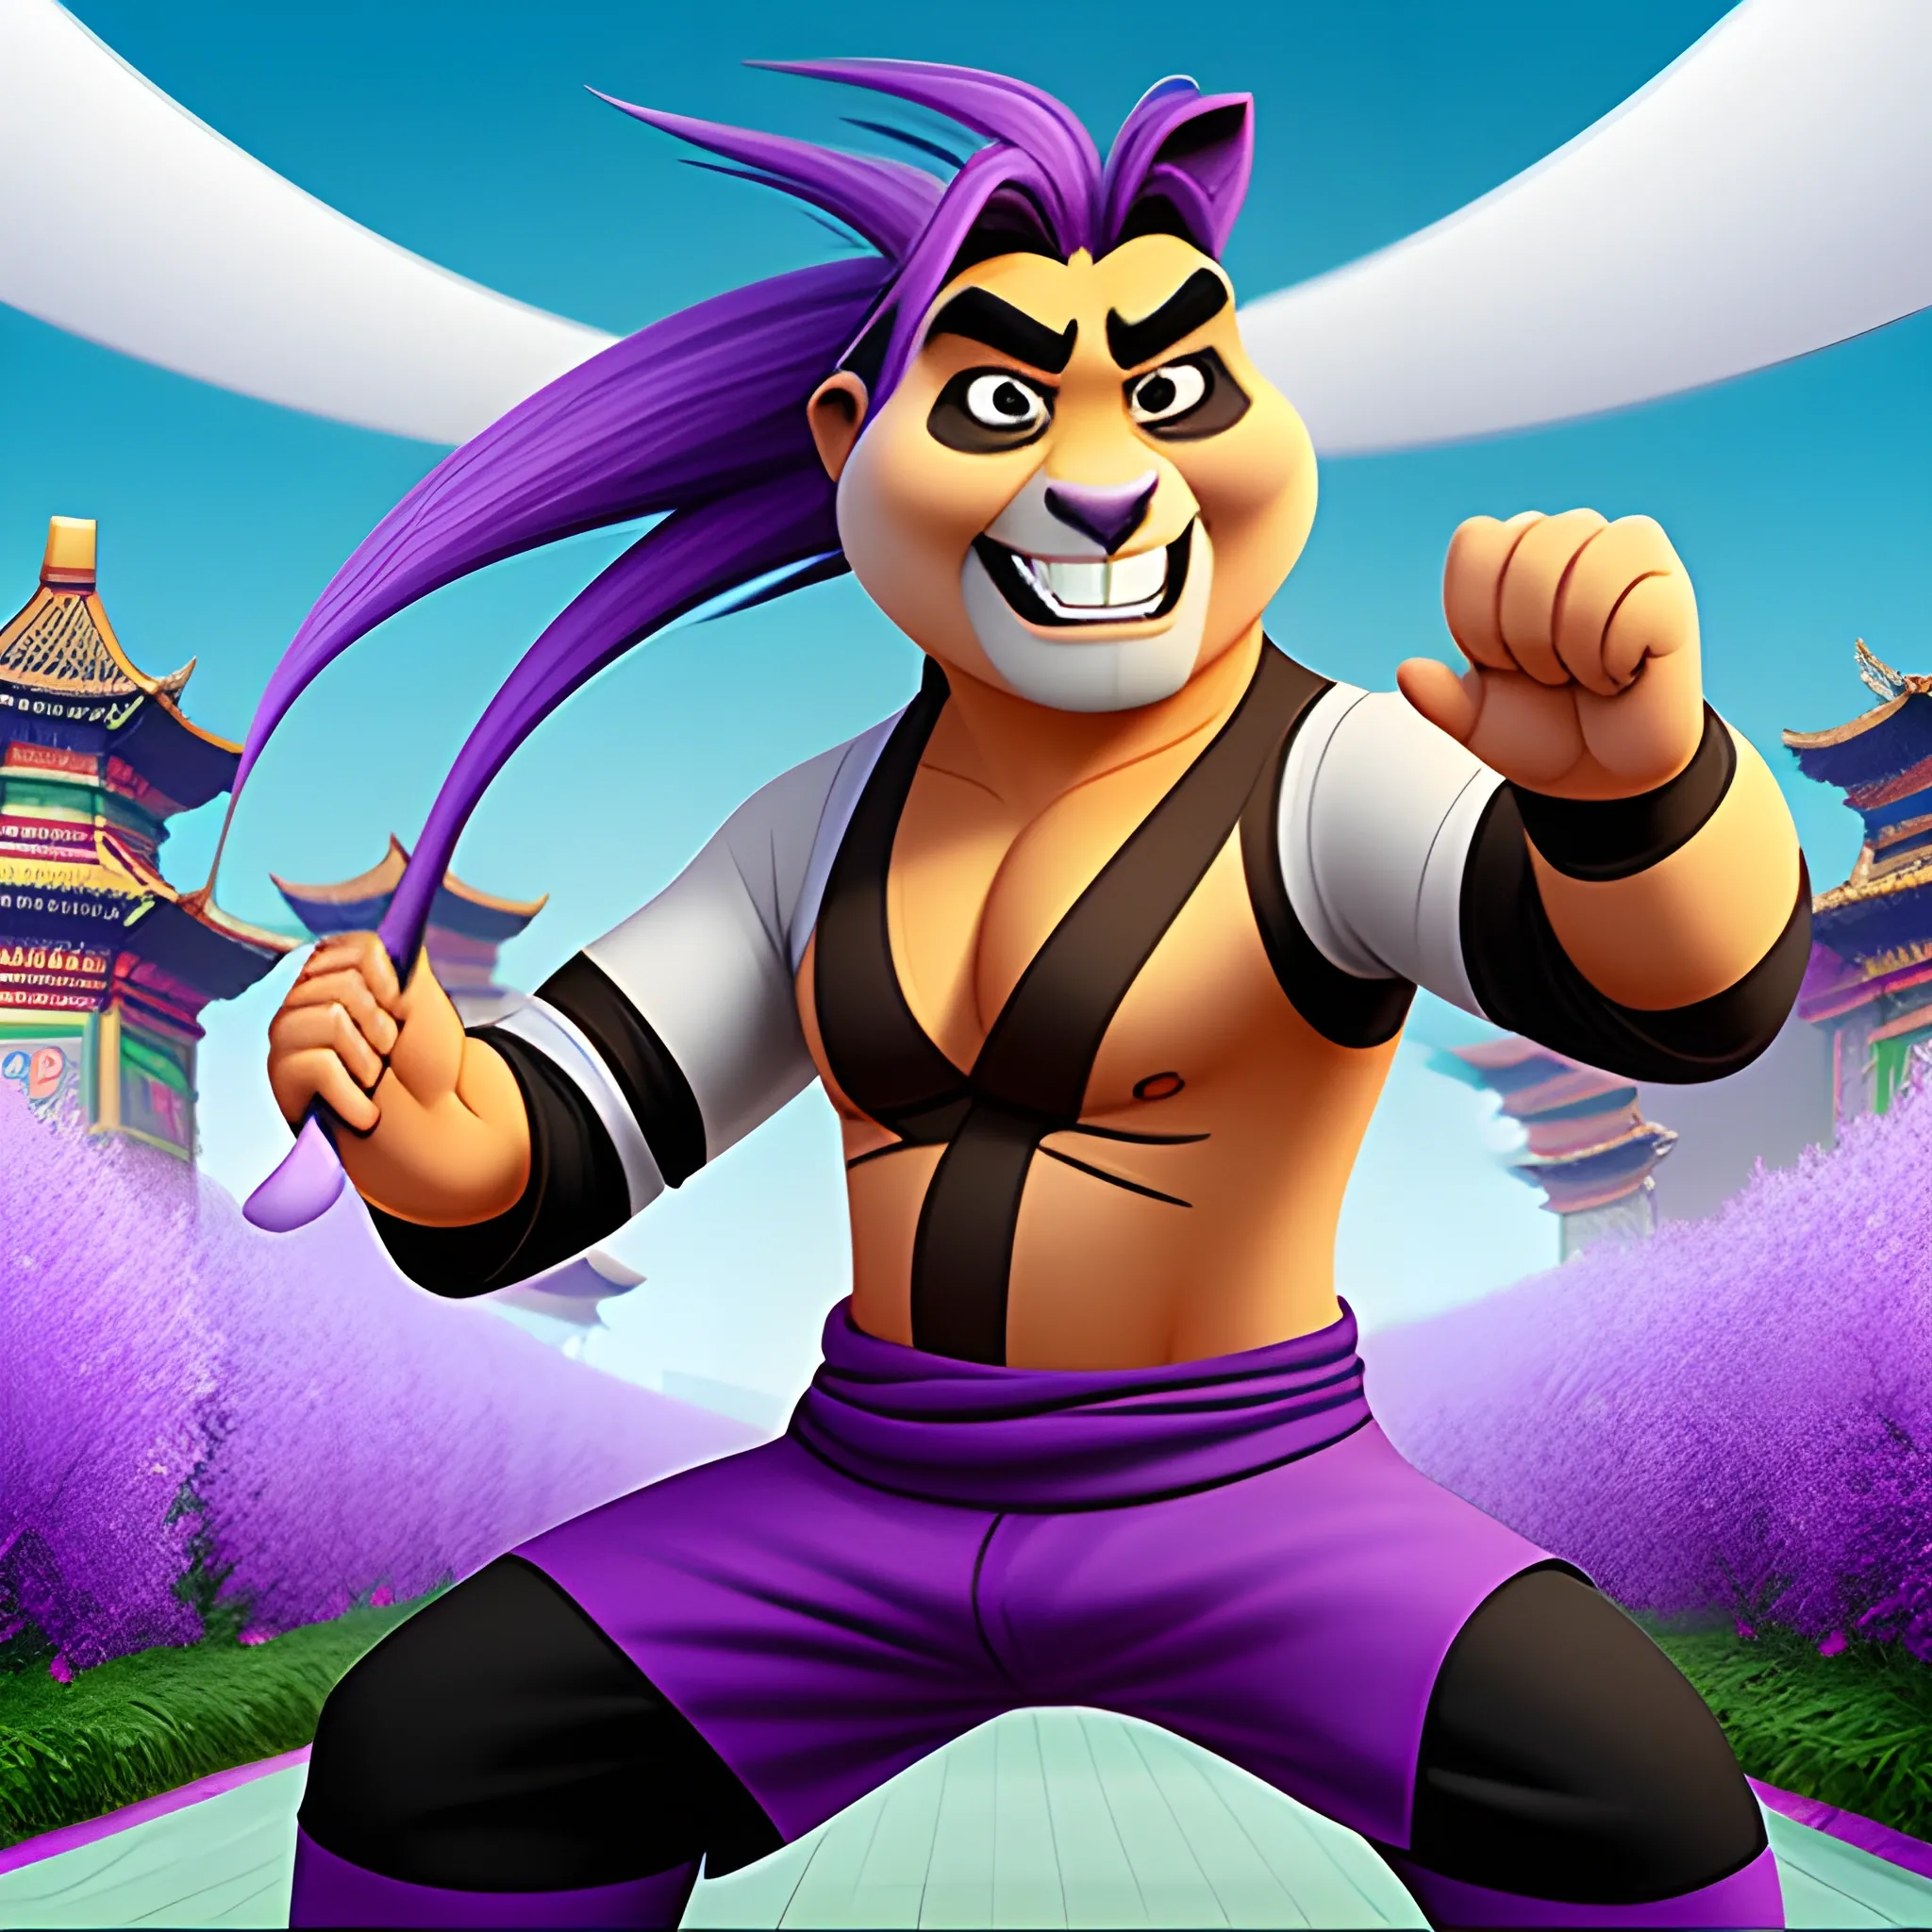 A Chinese teenager with purple hair, fighting with a kung fu panda, Cartoon